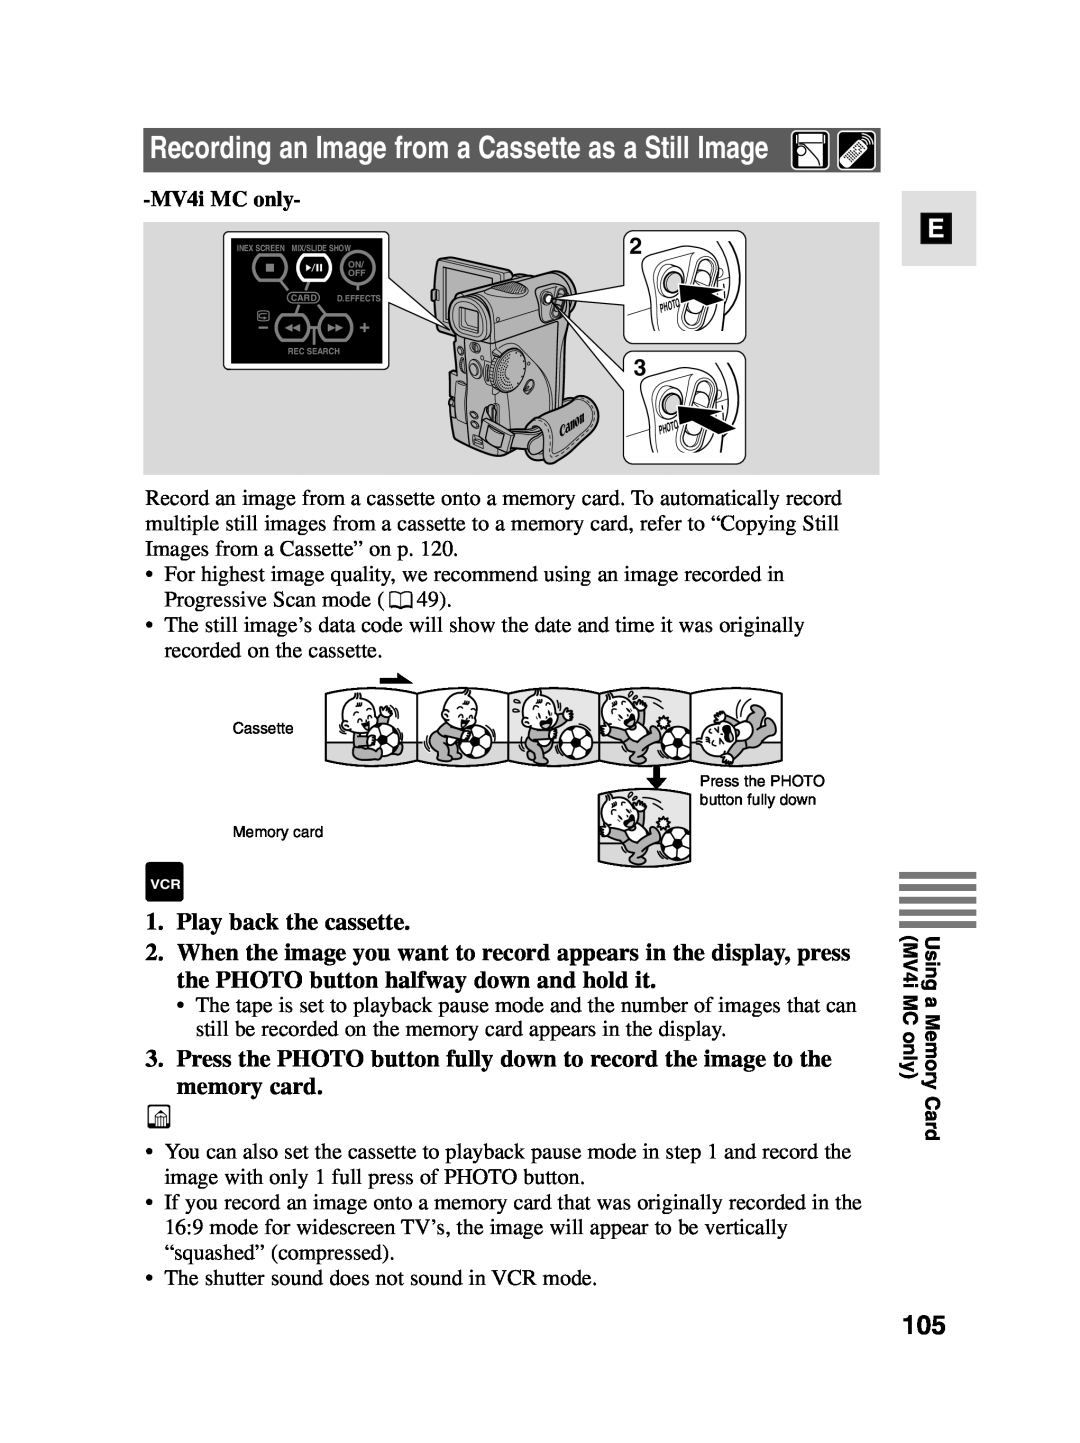 Canon MV4i MC instruction manual Recording an Image from a Cassette as a Still Image, Play back the cassette 